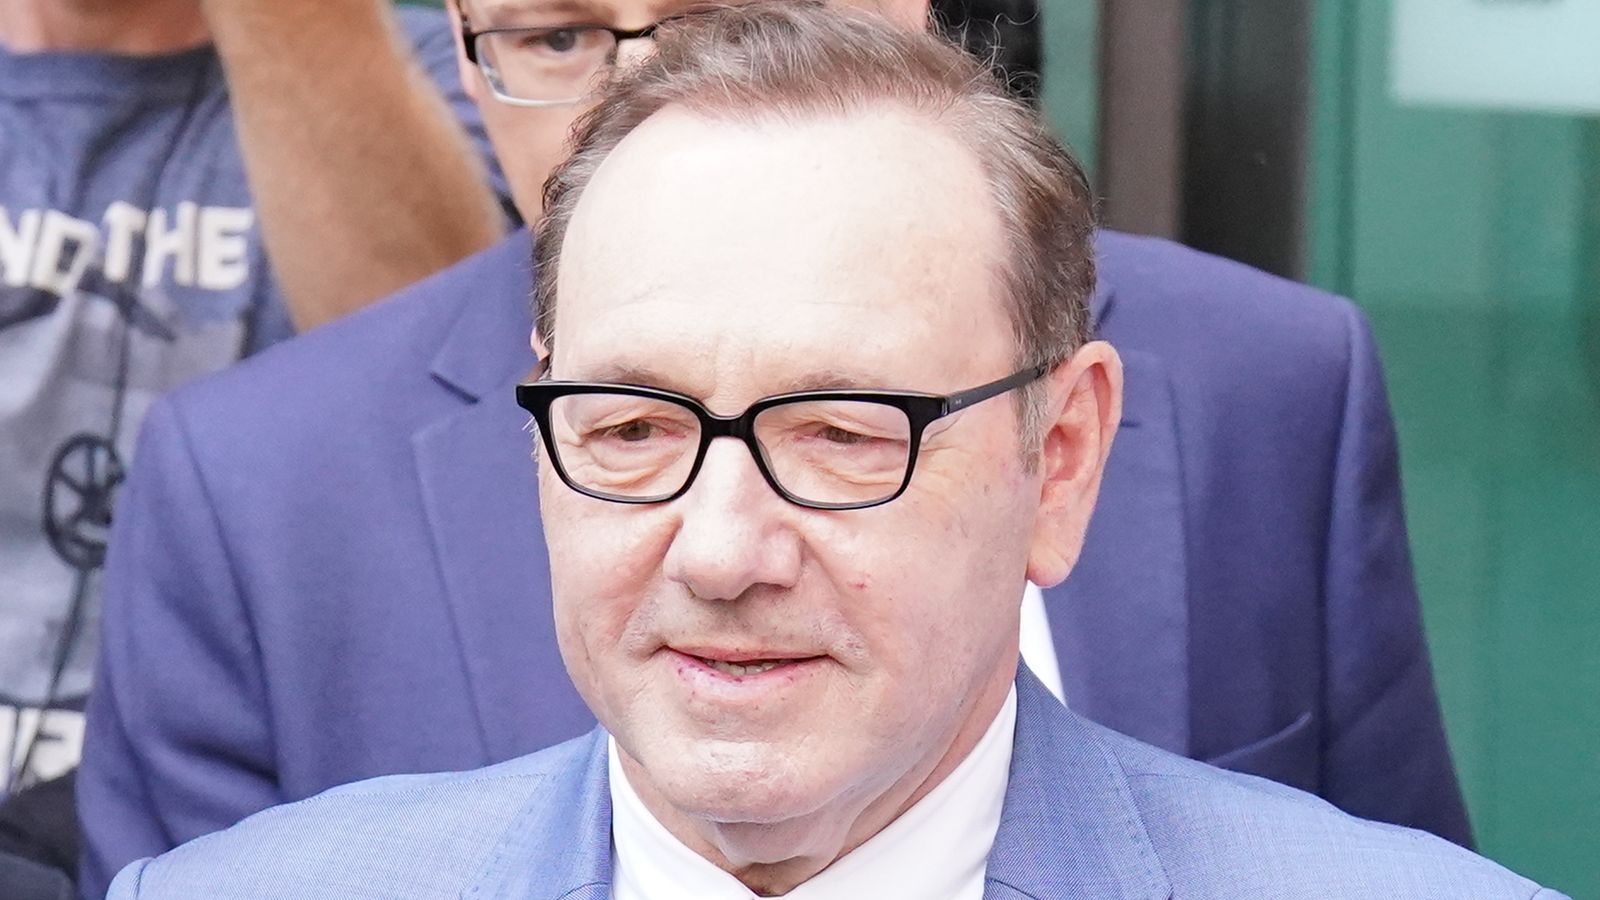 Kevin Spacey appears in court via videolink accused of seven further sex offences